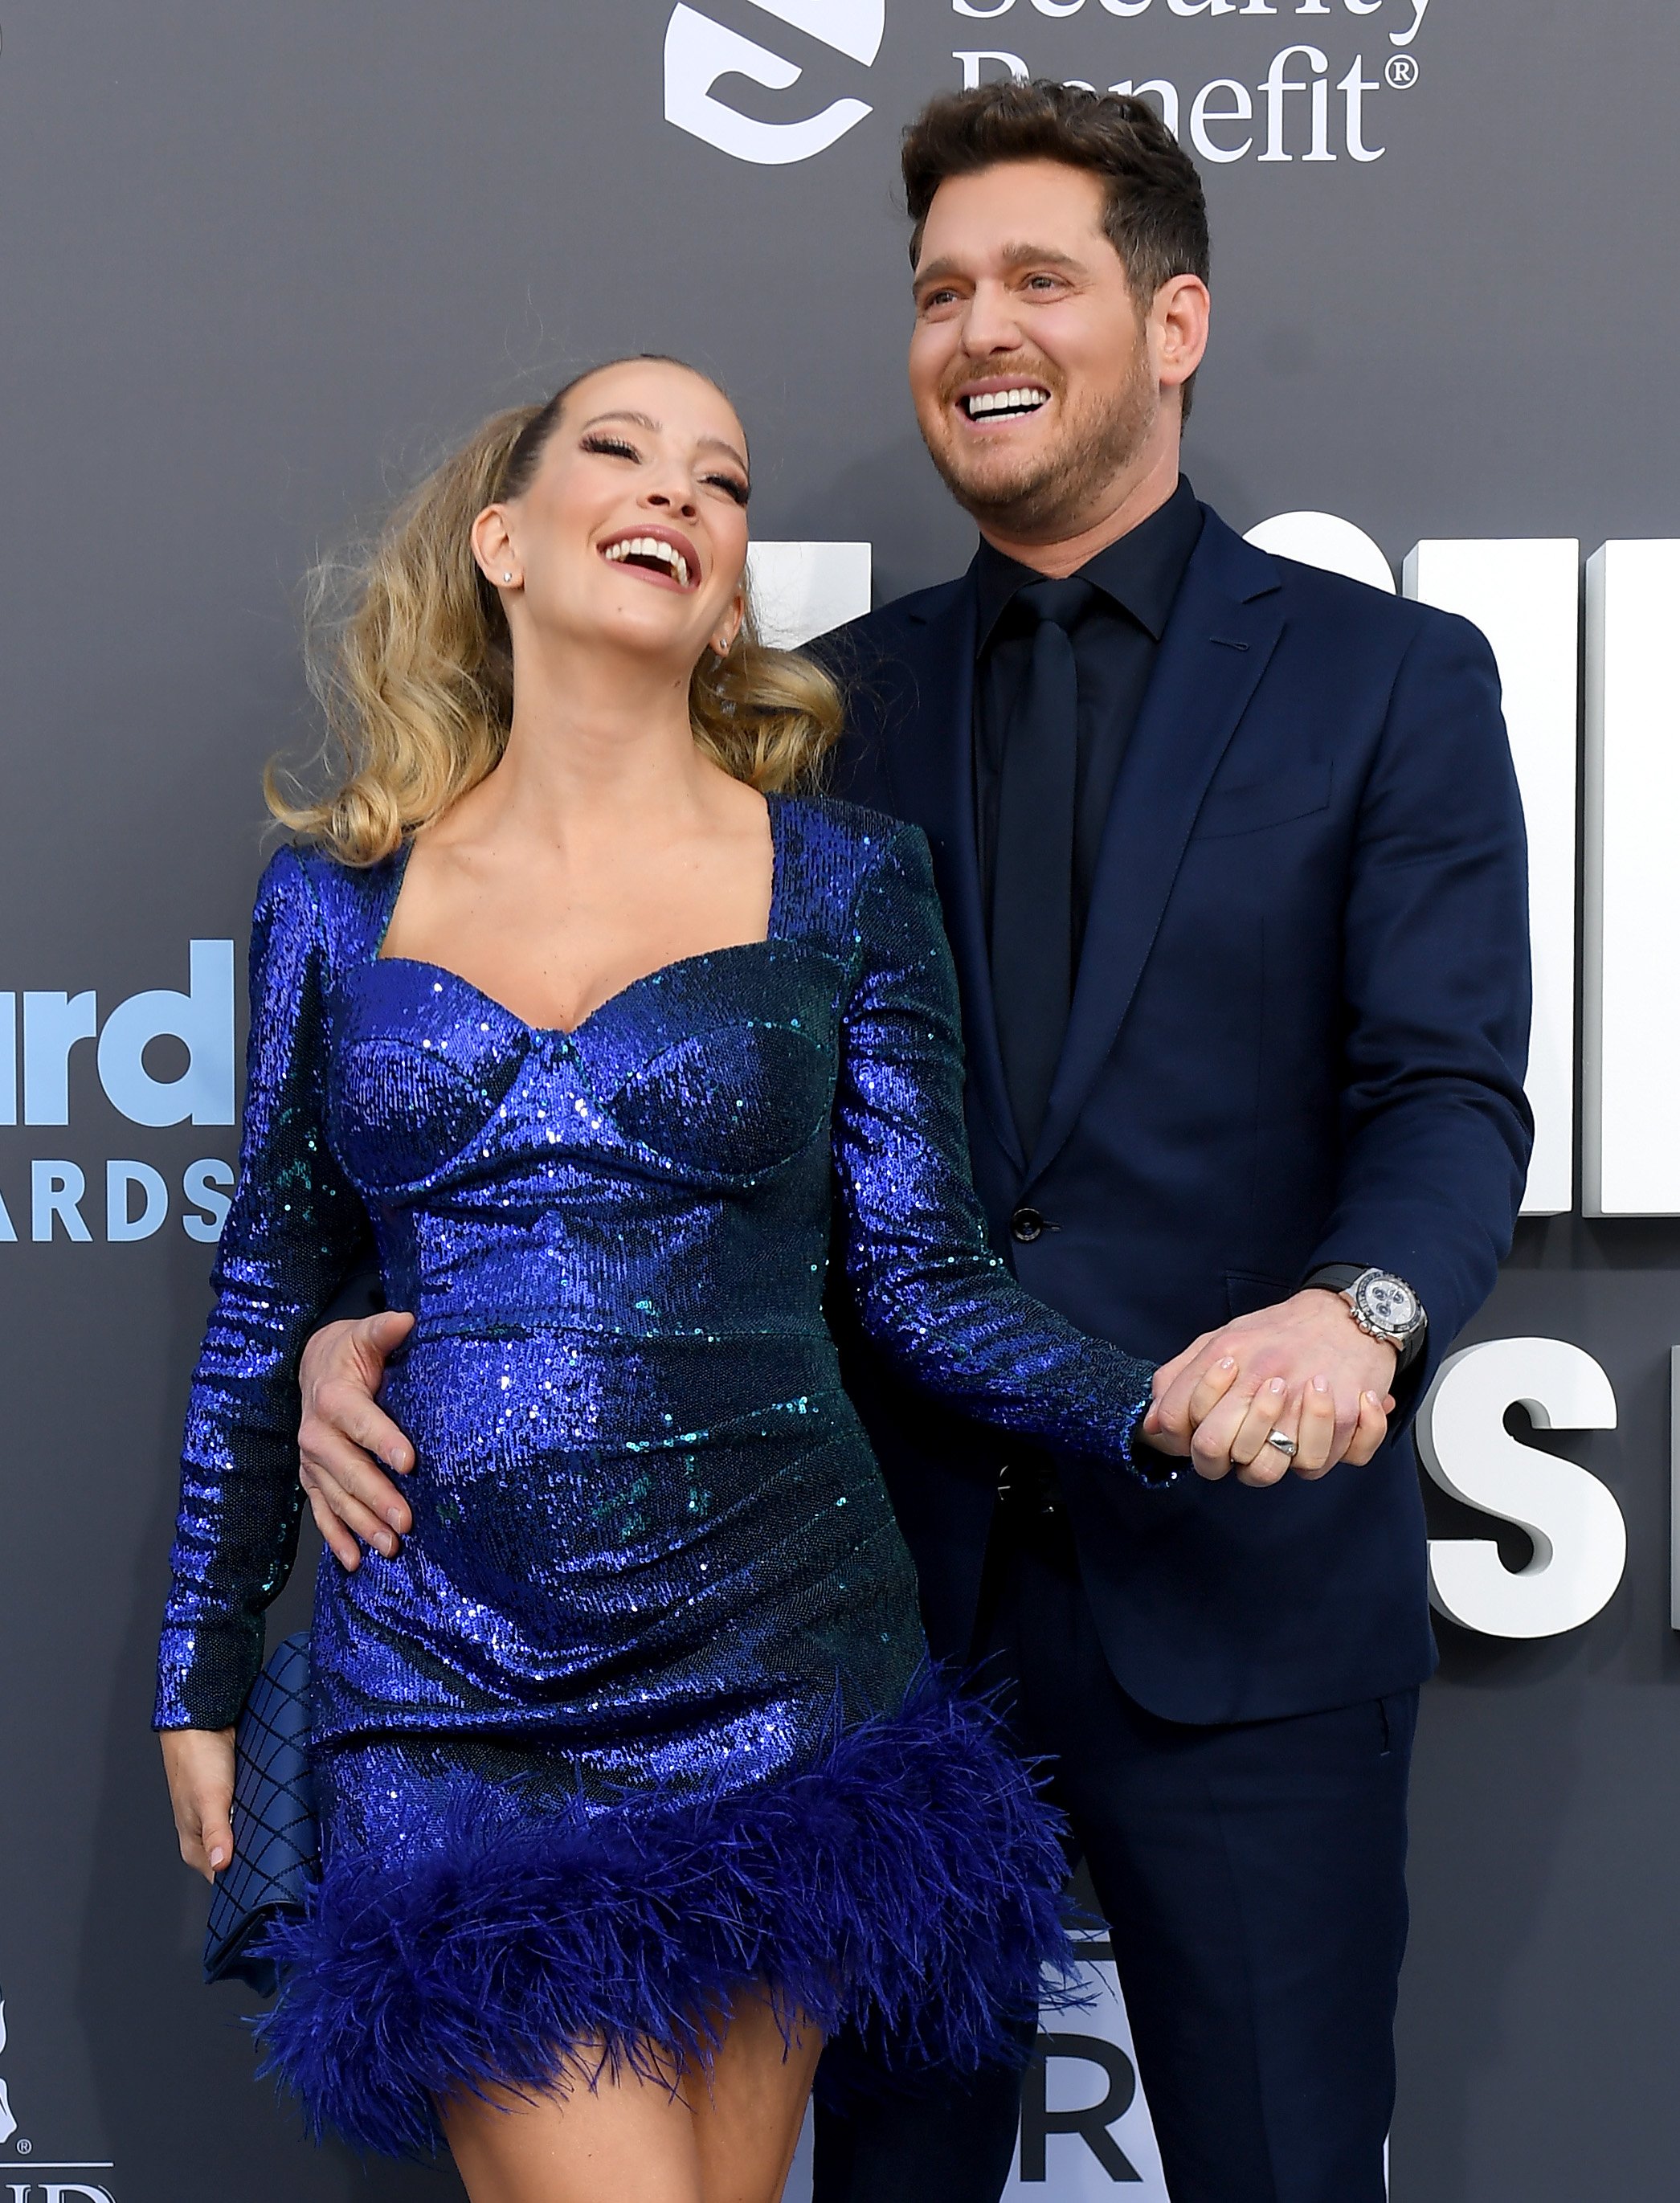 Luisana Lopilato and Michael Bublé attend the 2022 Billboard Music Awards at MGM Grand Garden Arena on May 15, 2022 in Las Vegas, Nevada | Source: Getty Images